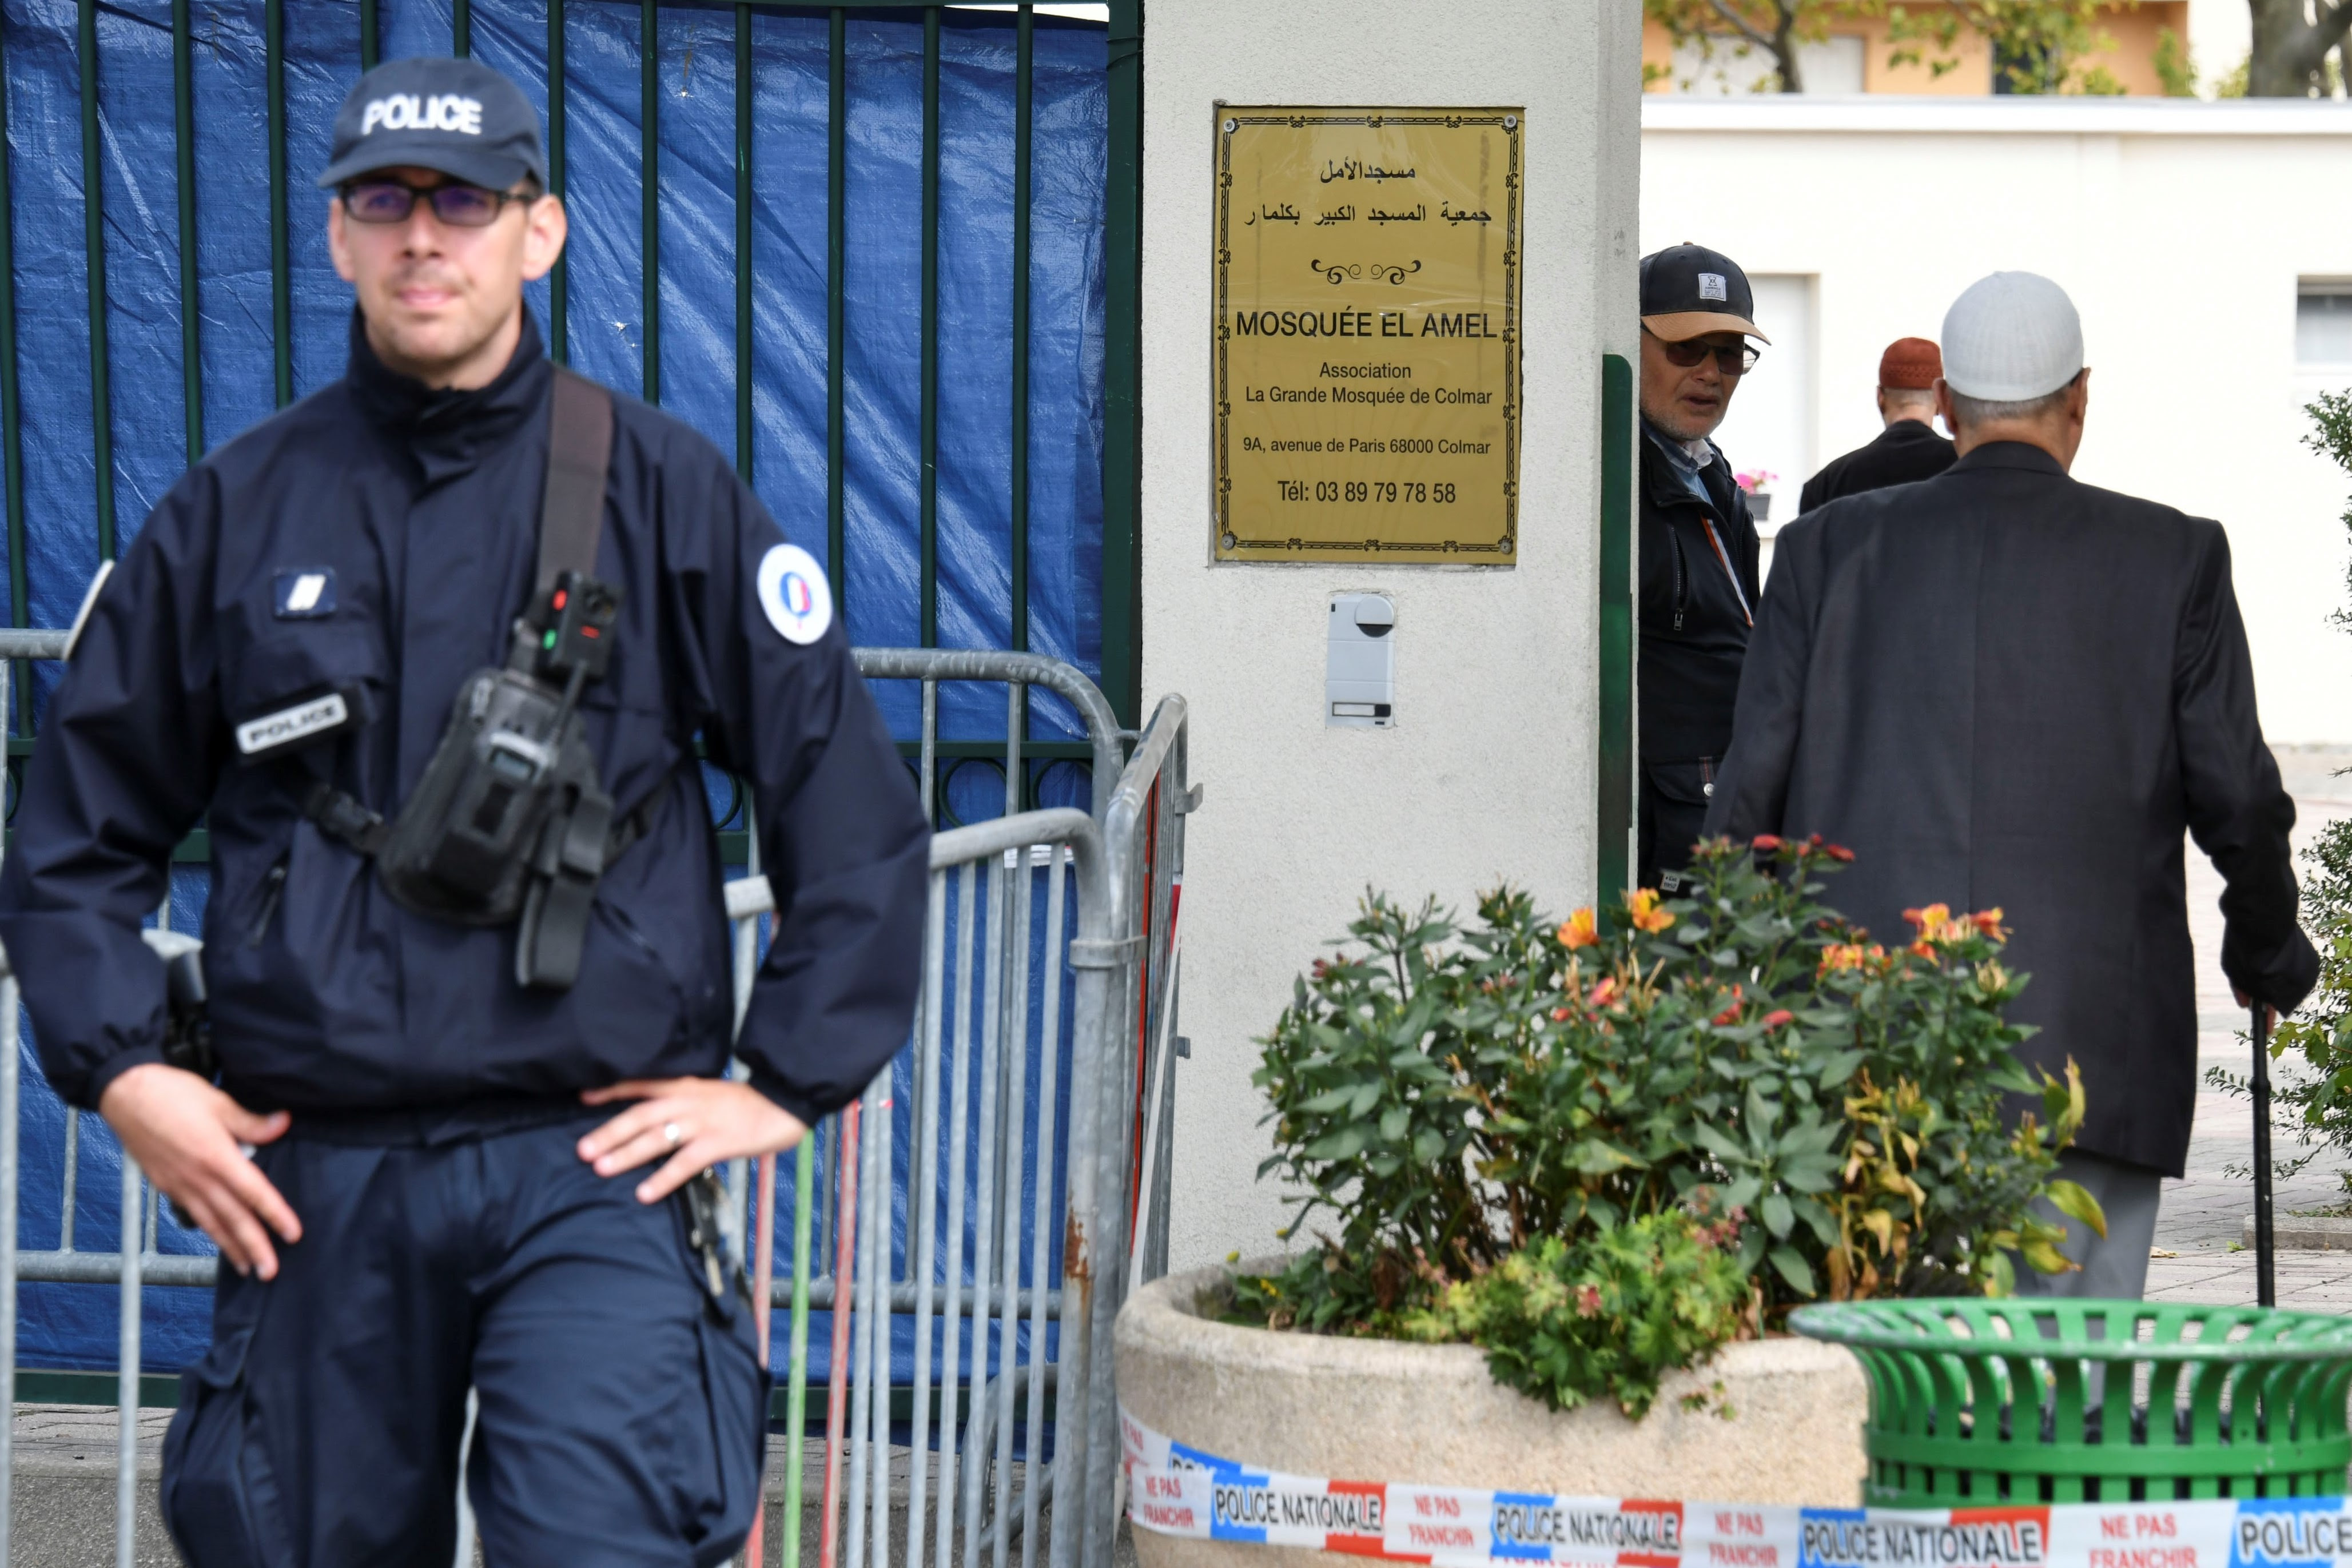 Worshippers arrive at the Grande Mosque in Colmar, eastern France, while a police officer stands guard on 22 September (AFP